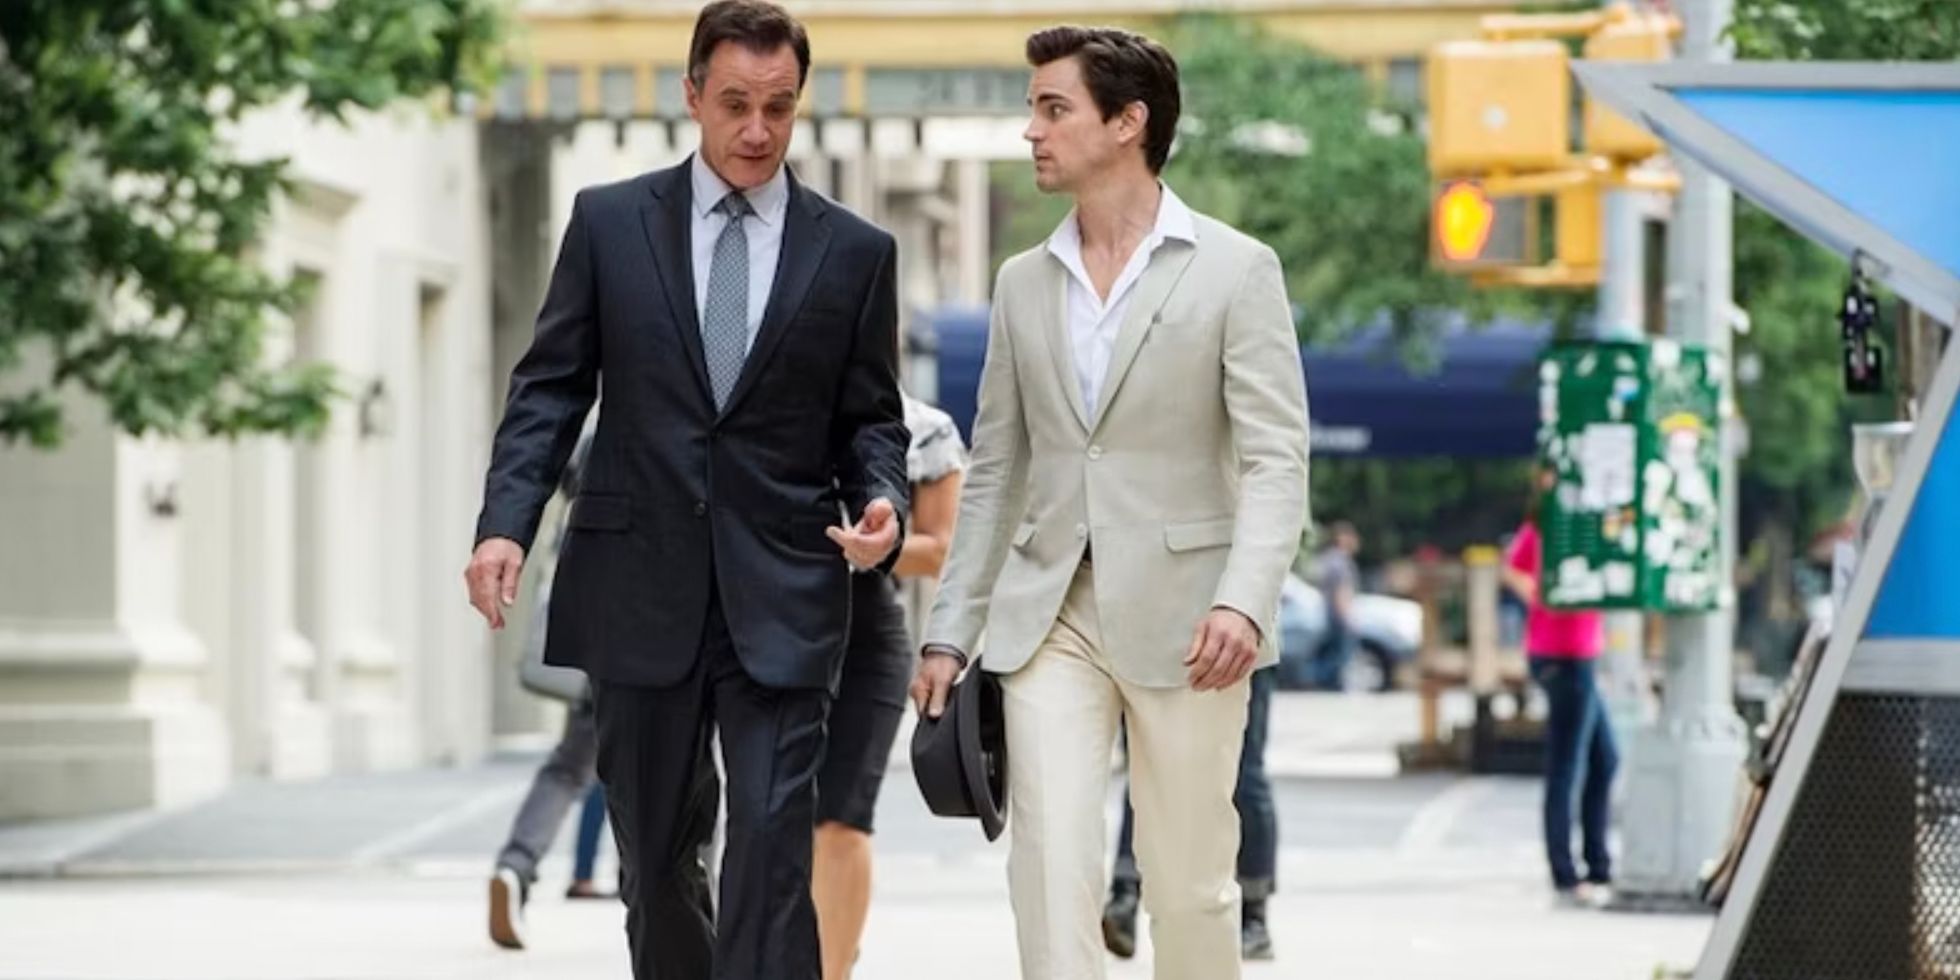 Neal and Peter walking together in White Collar